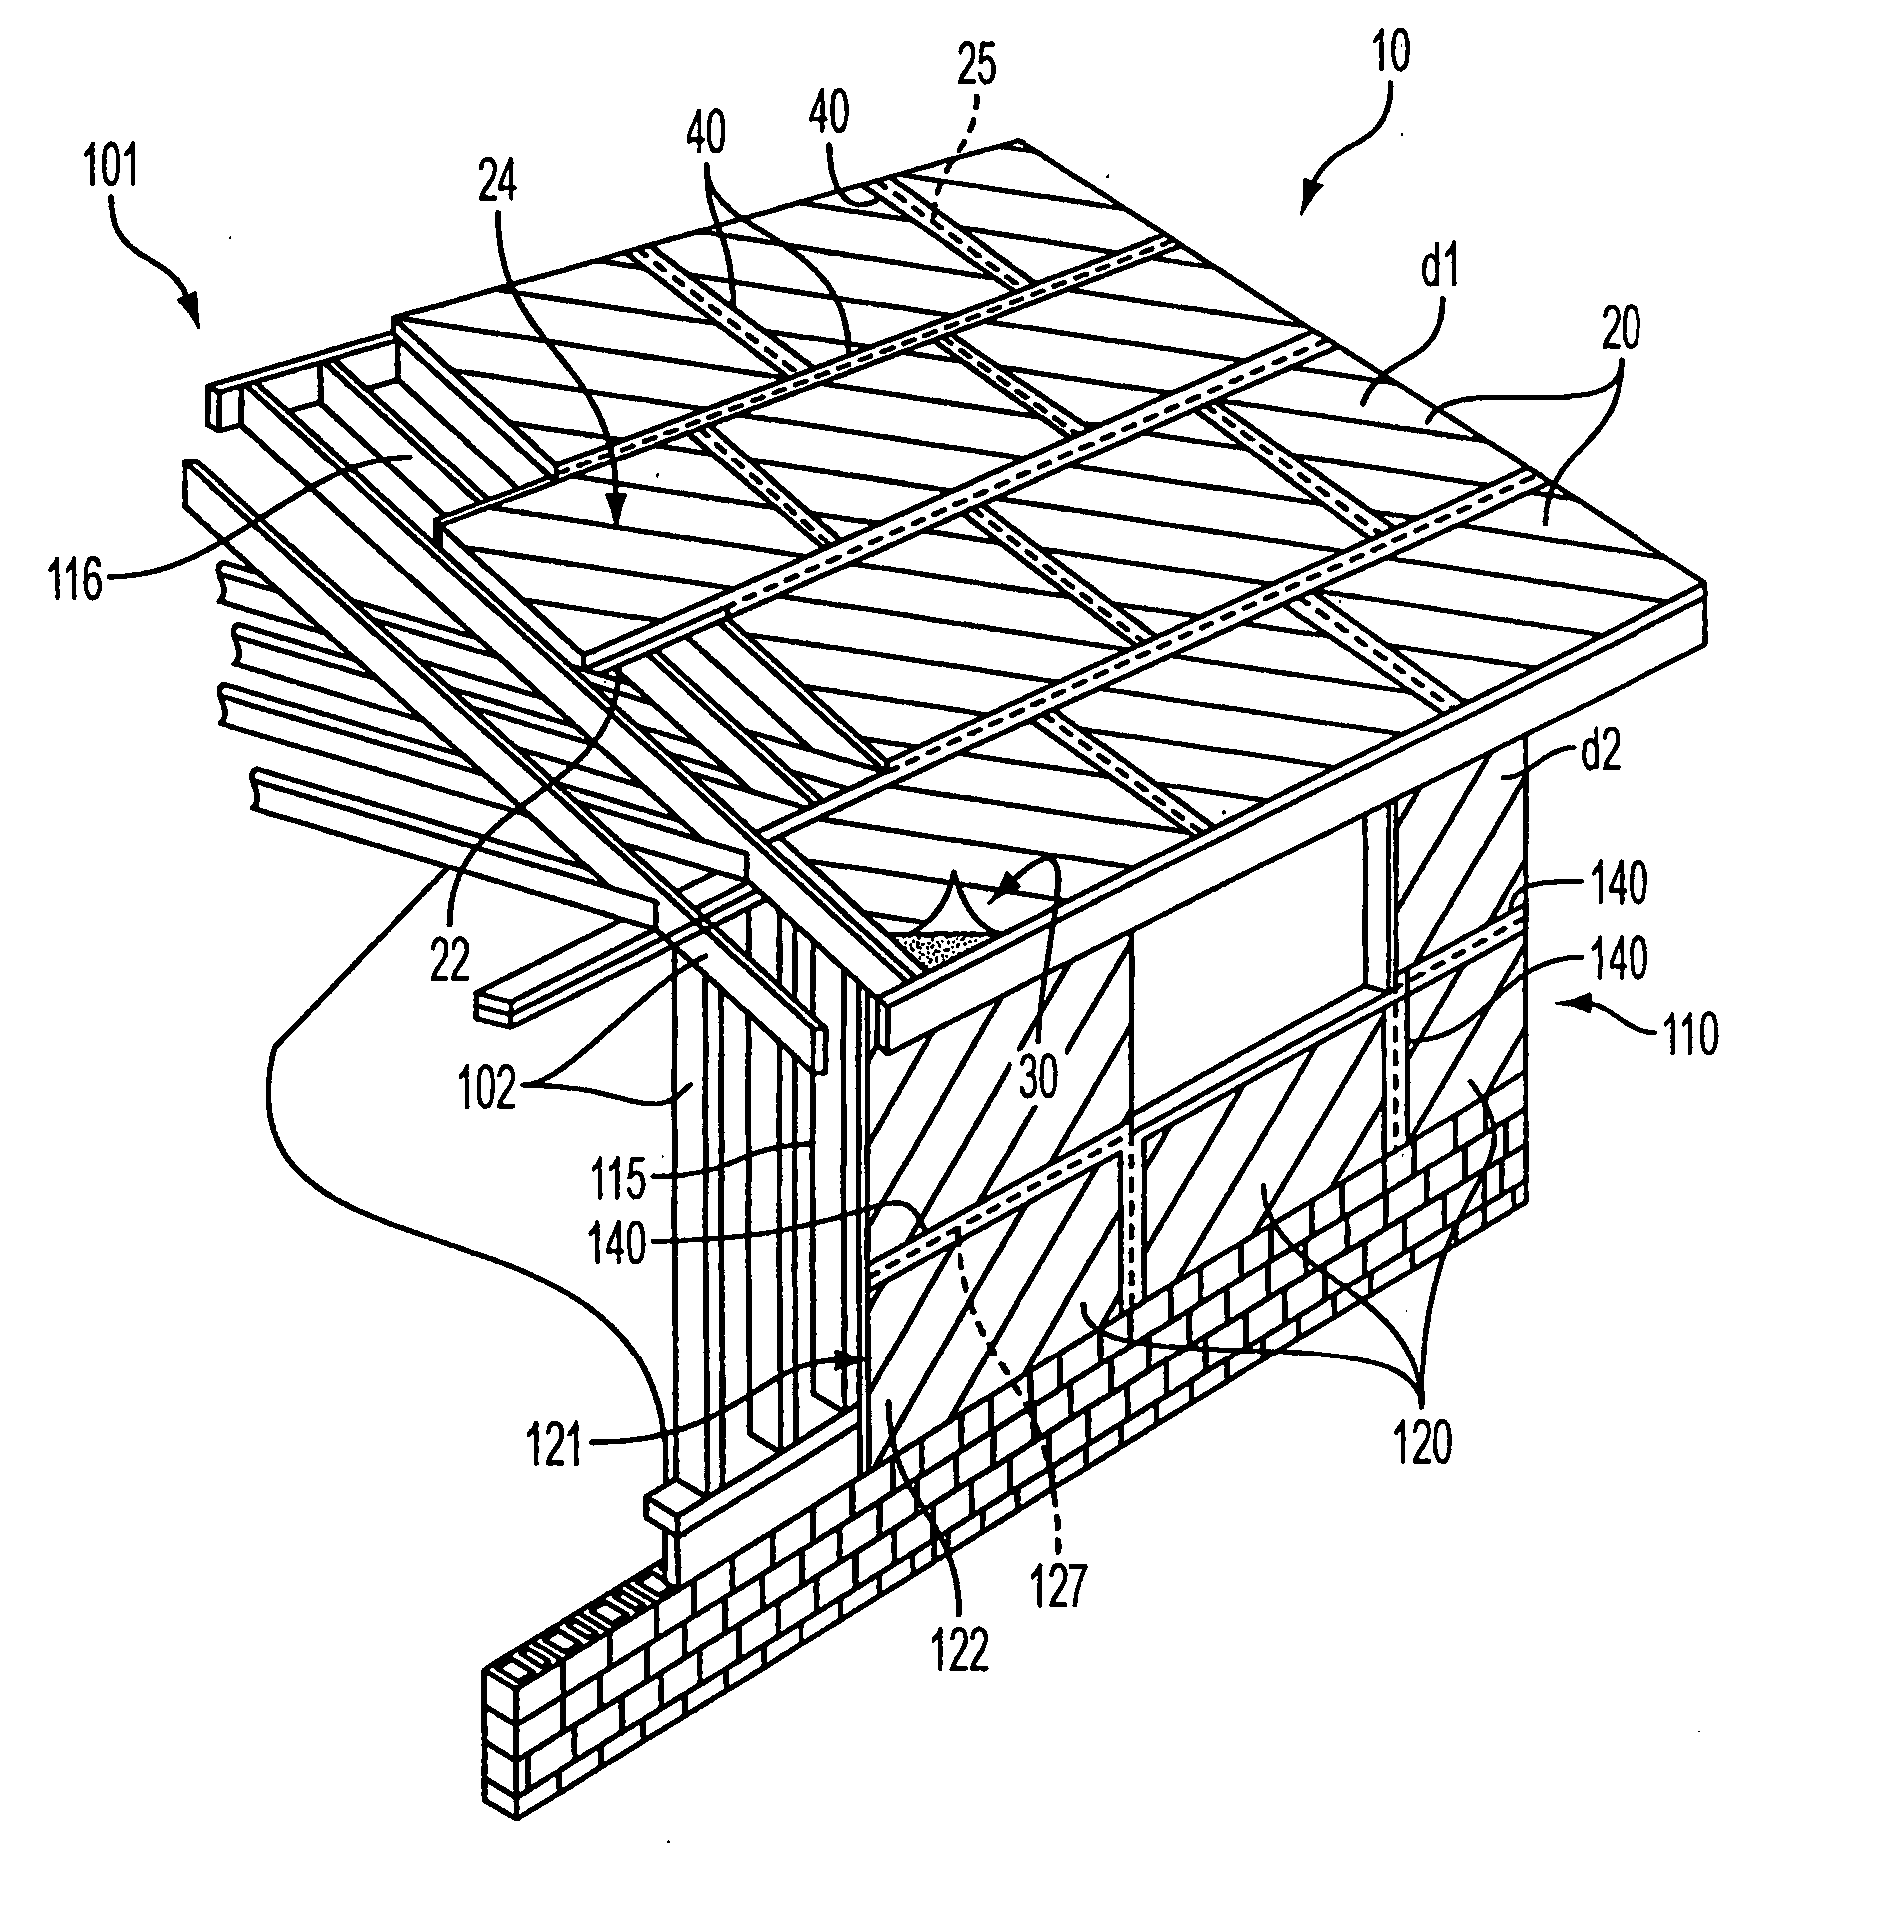 Method and system for installation of diverse exterior sheathing components of buildings